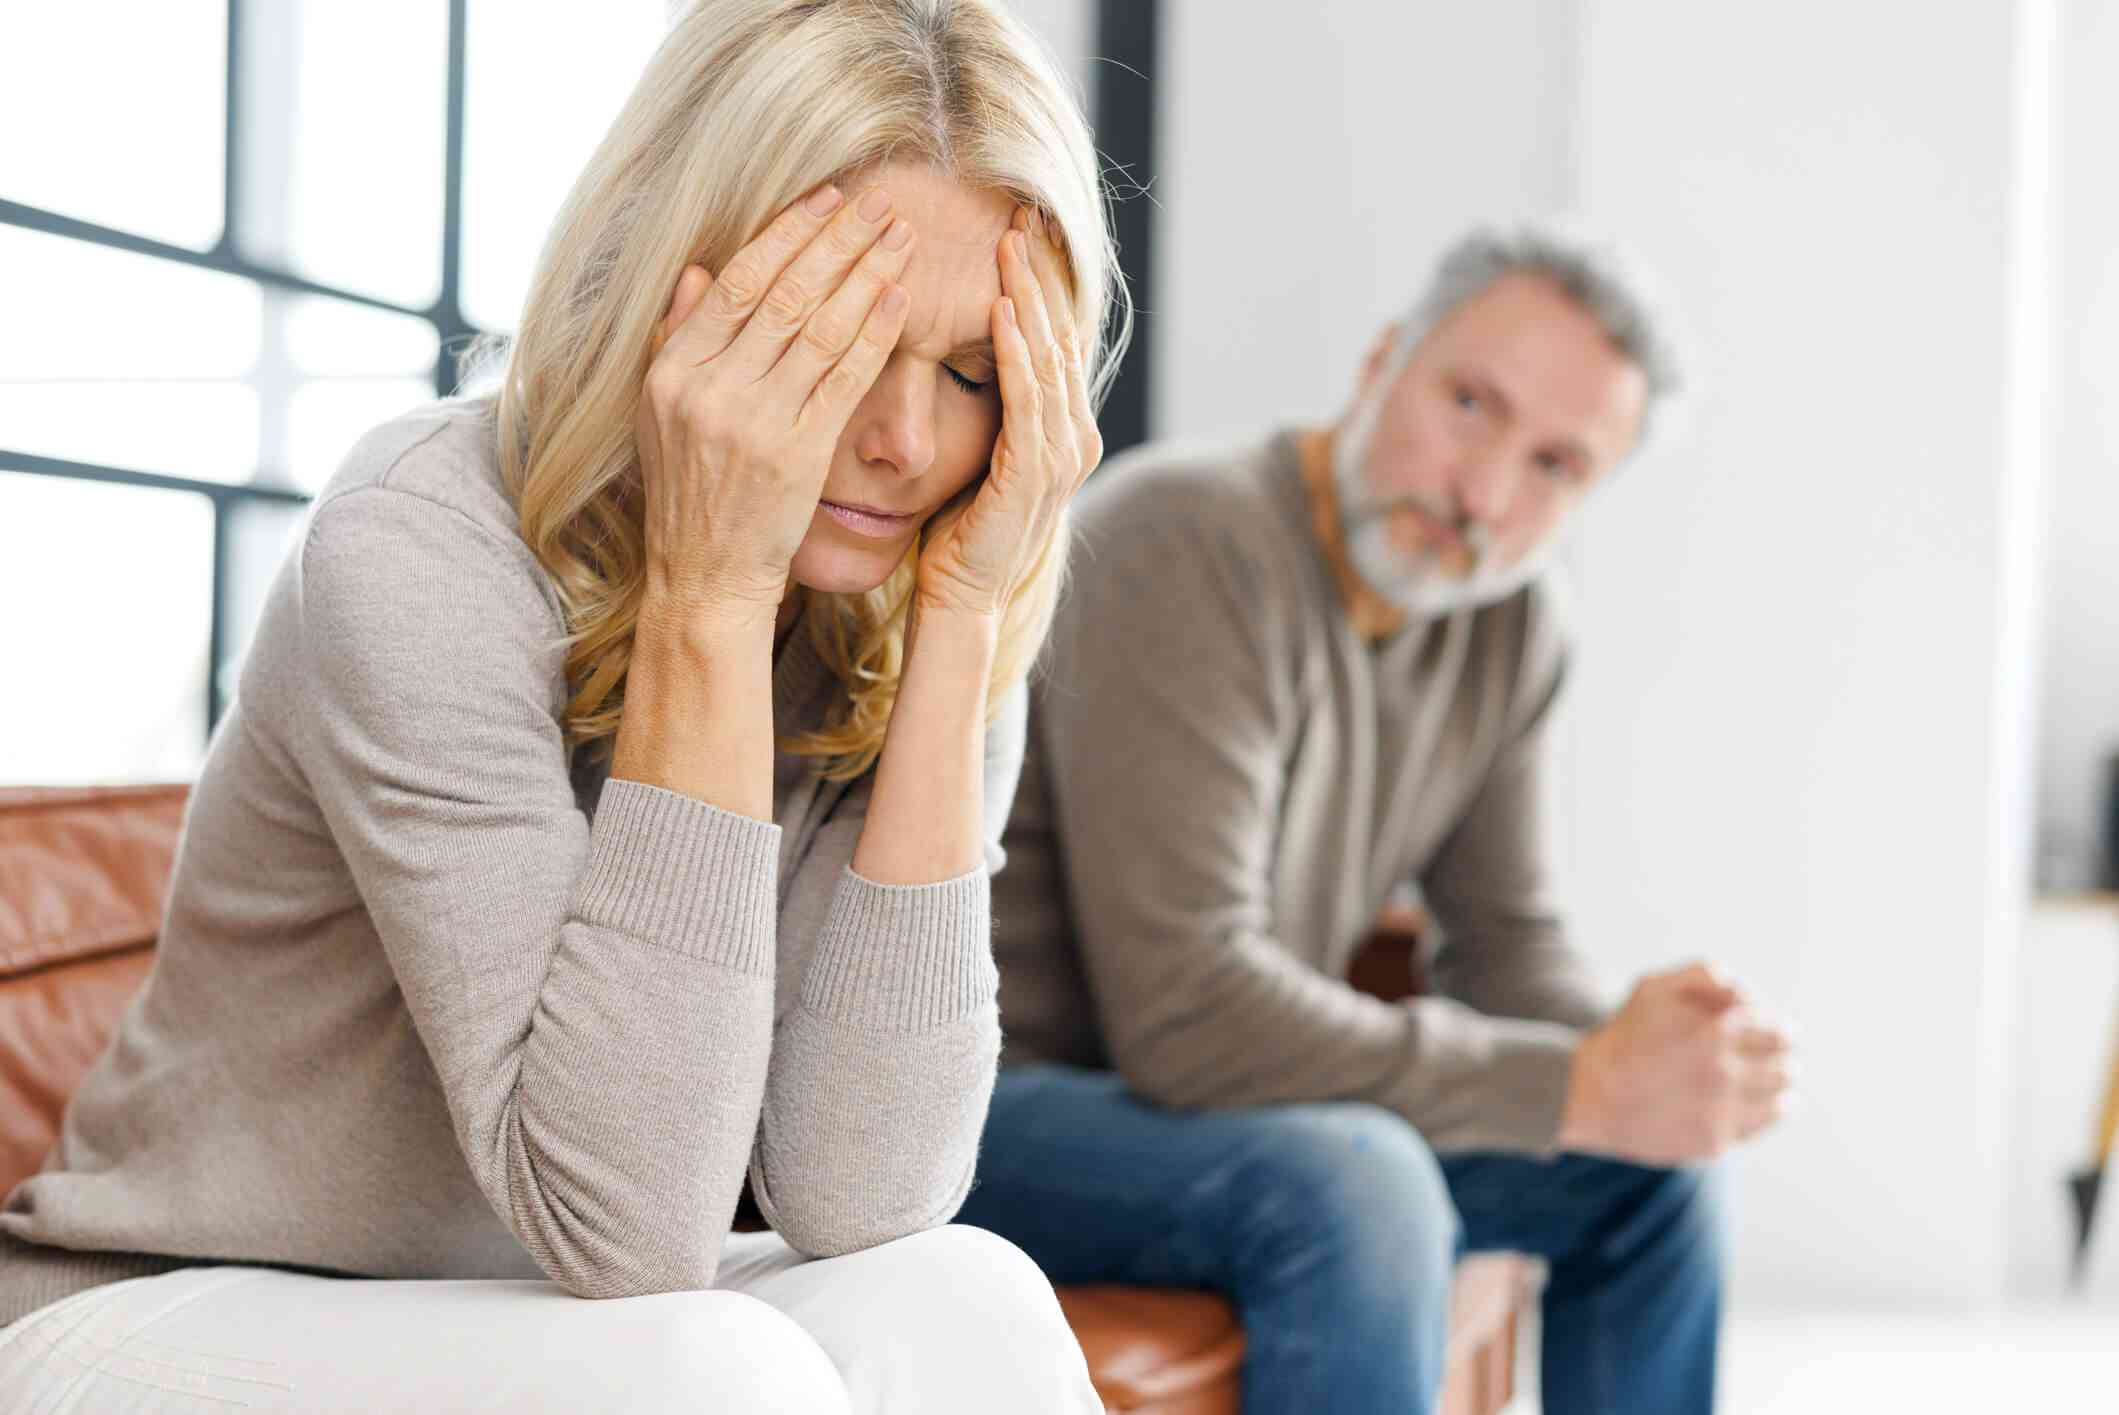 Husband With Anger Issues? Learn How Being Angry Can Ruin Your Marriage BetterHelp